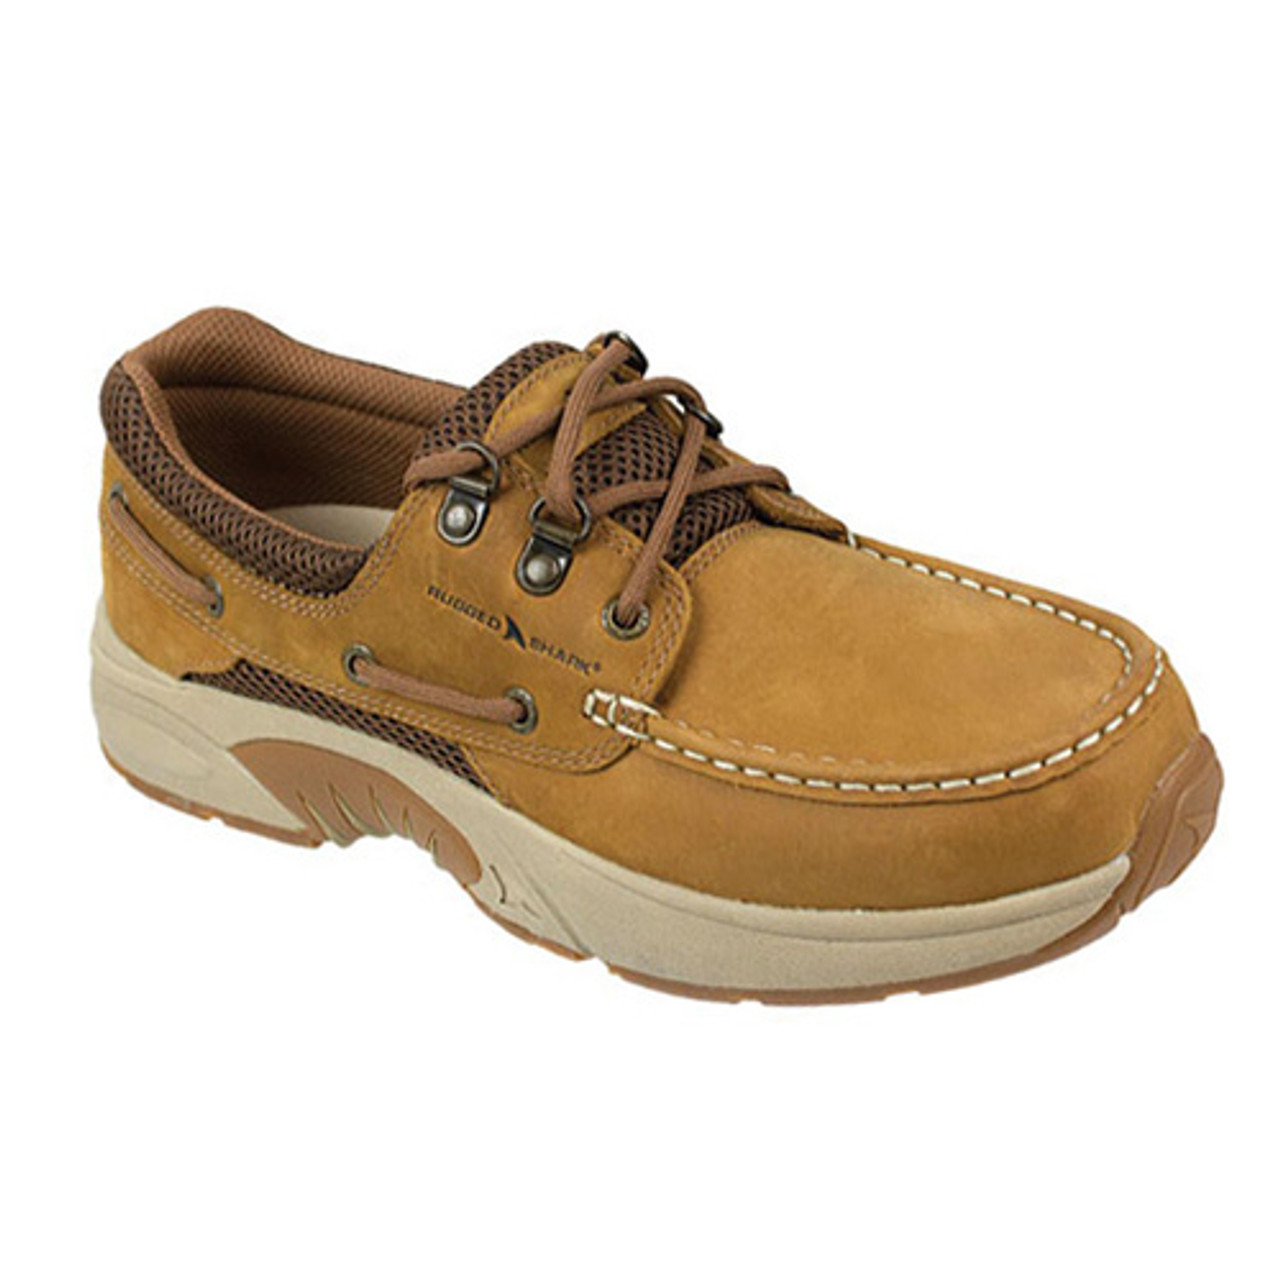 rugged shark axis boat shoes